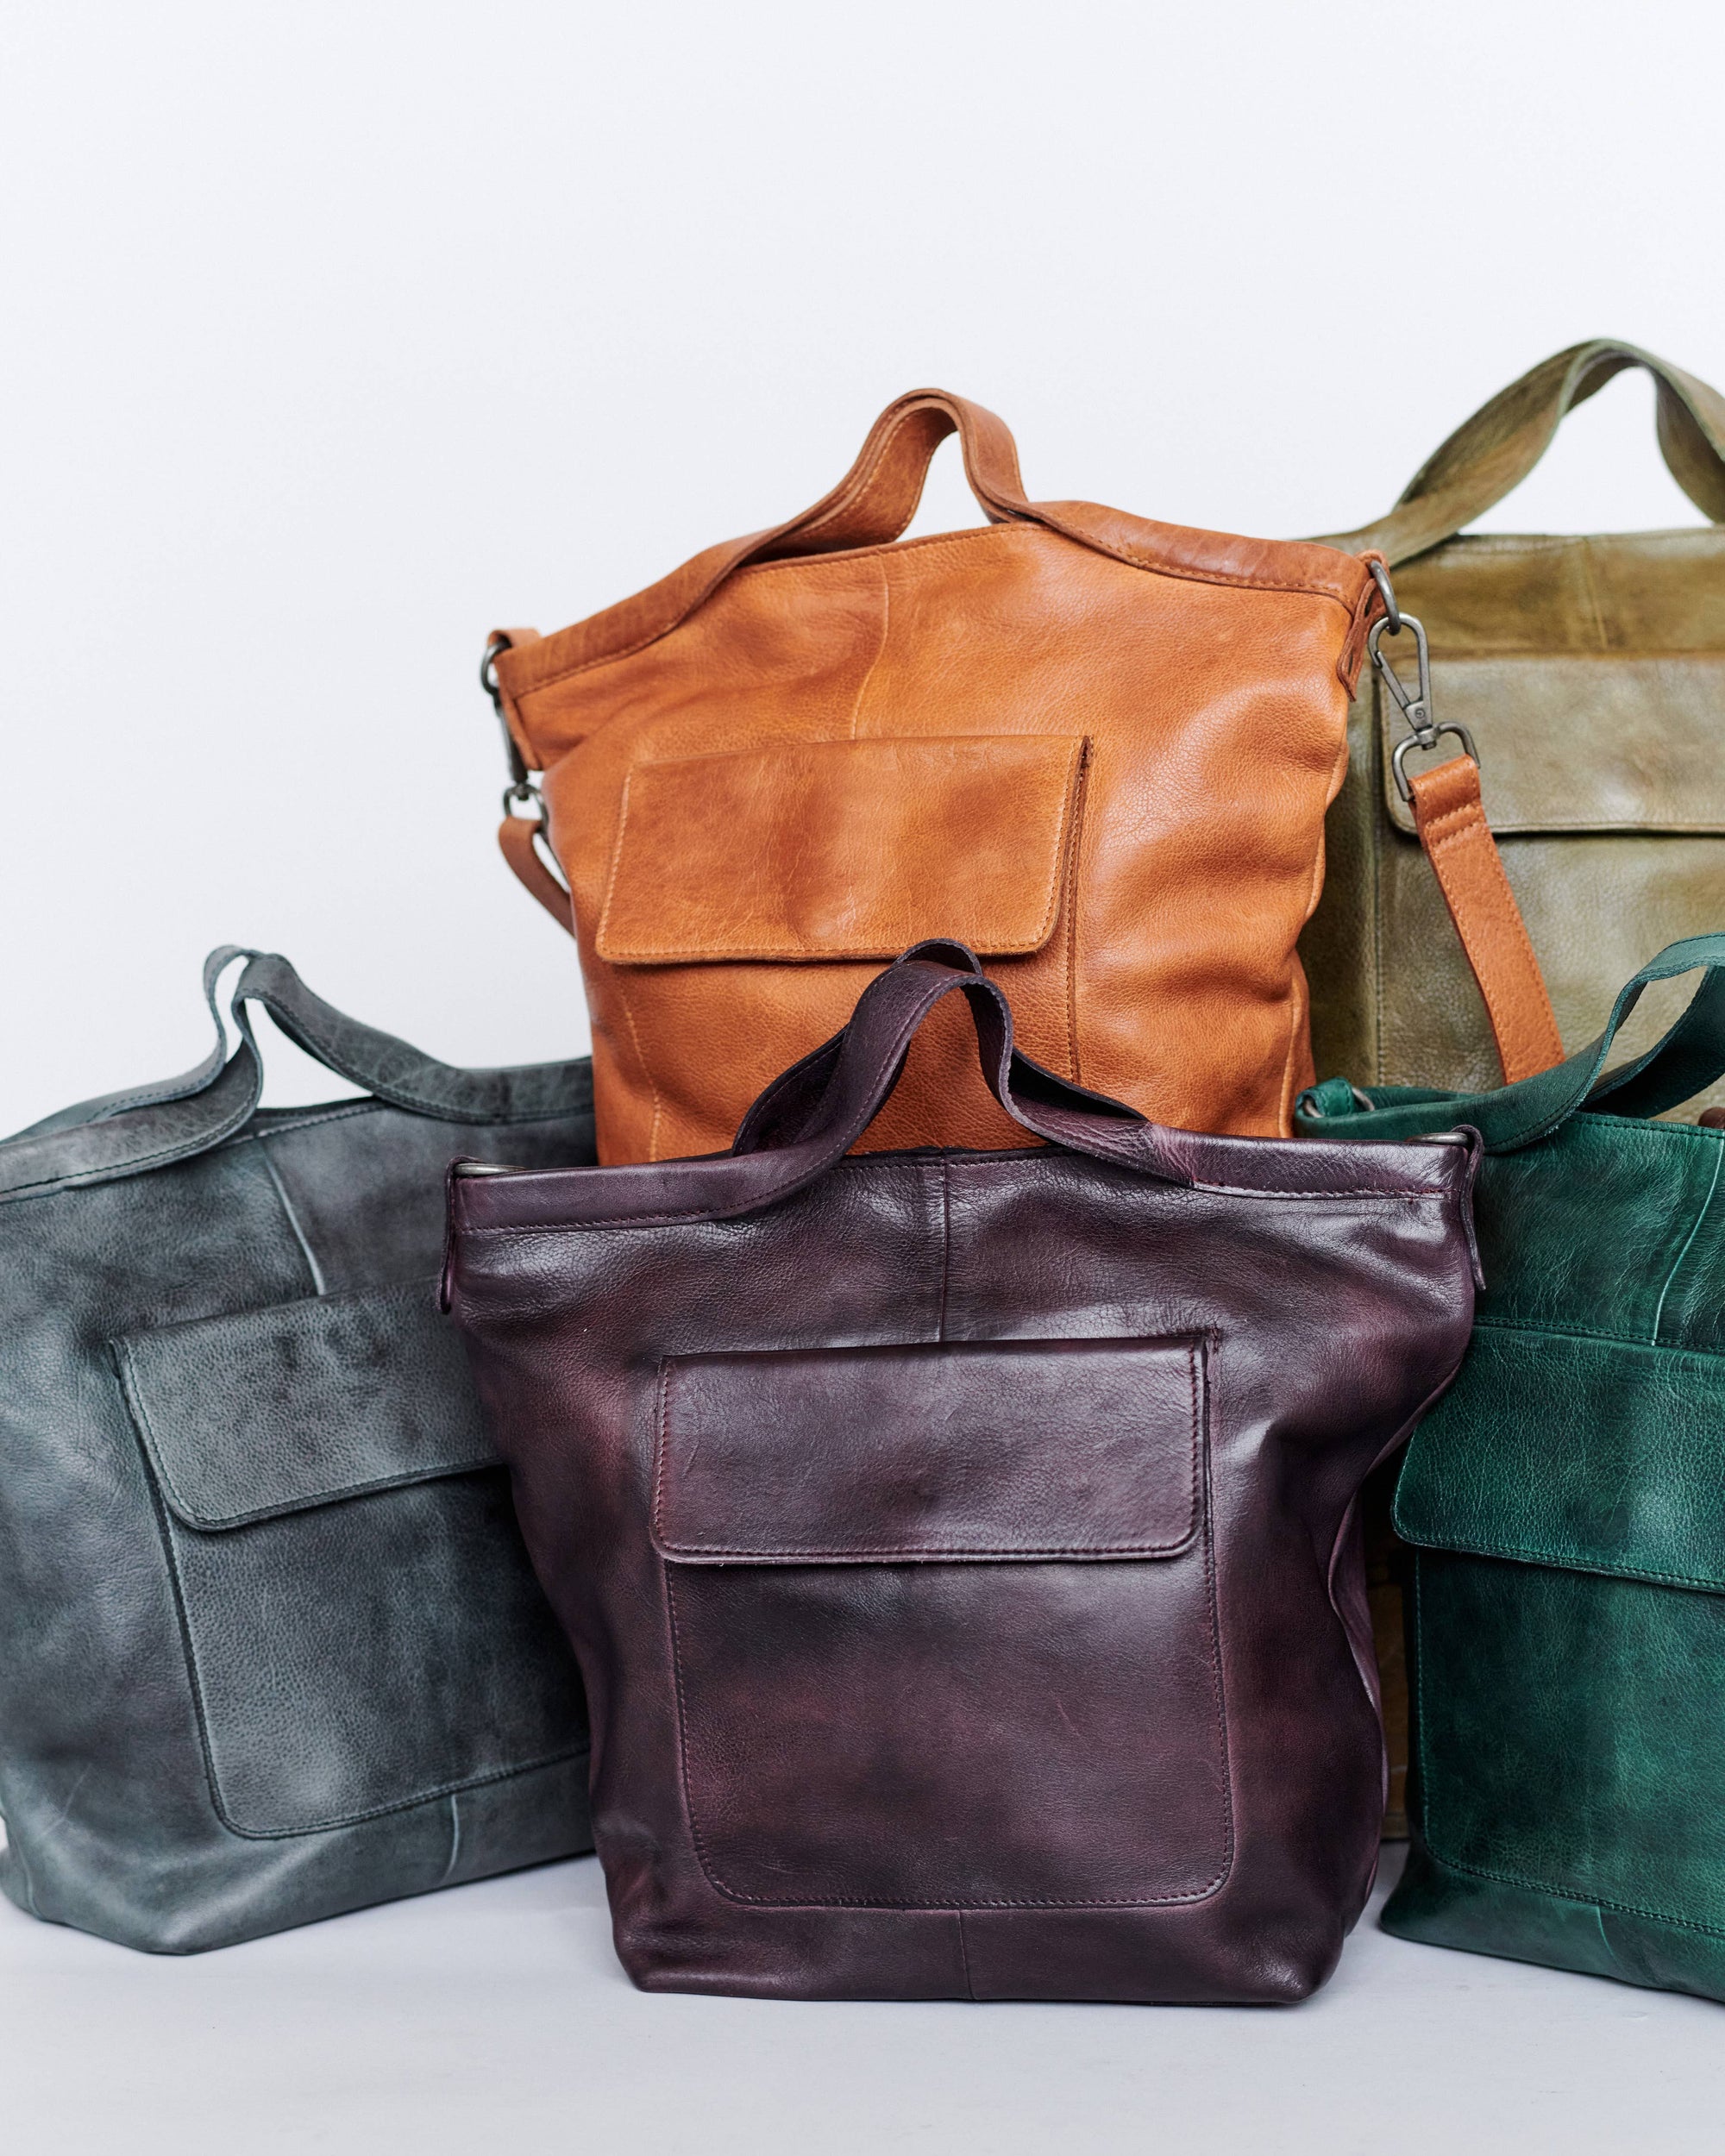 Bianca Handcrafted Leather Tote/Crossbody Bags